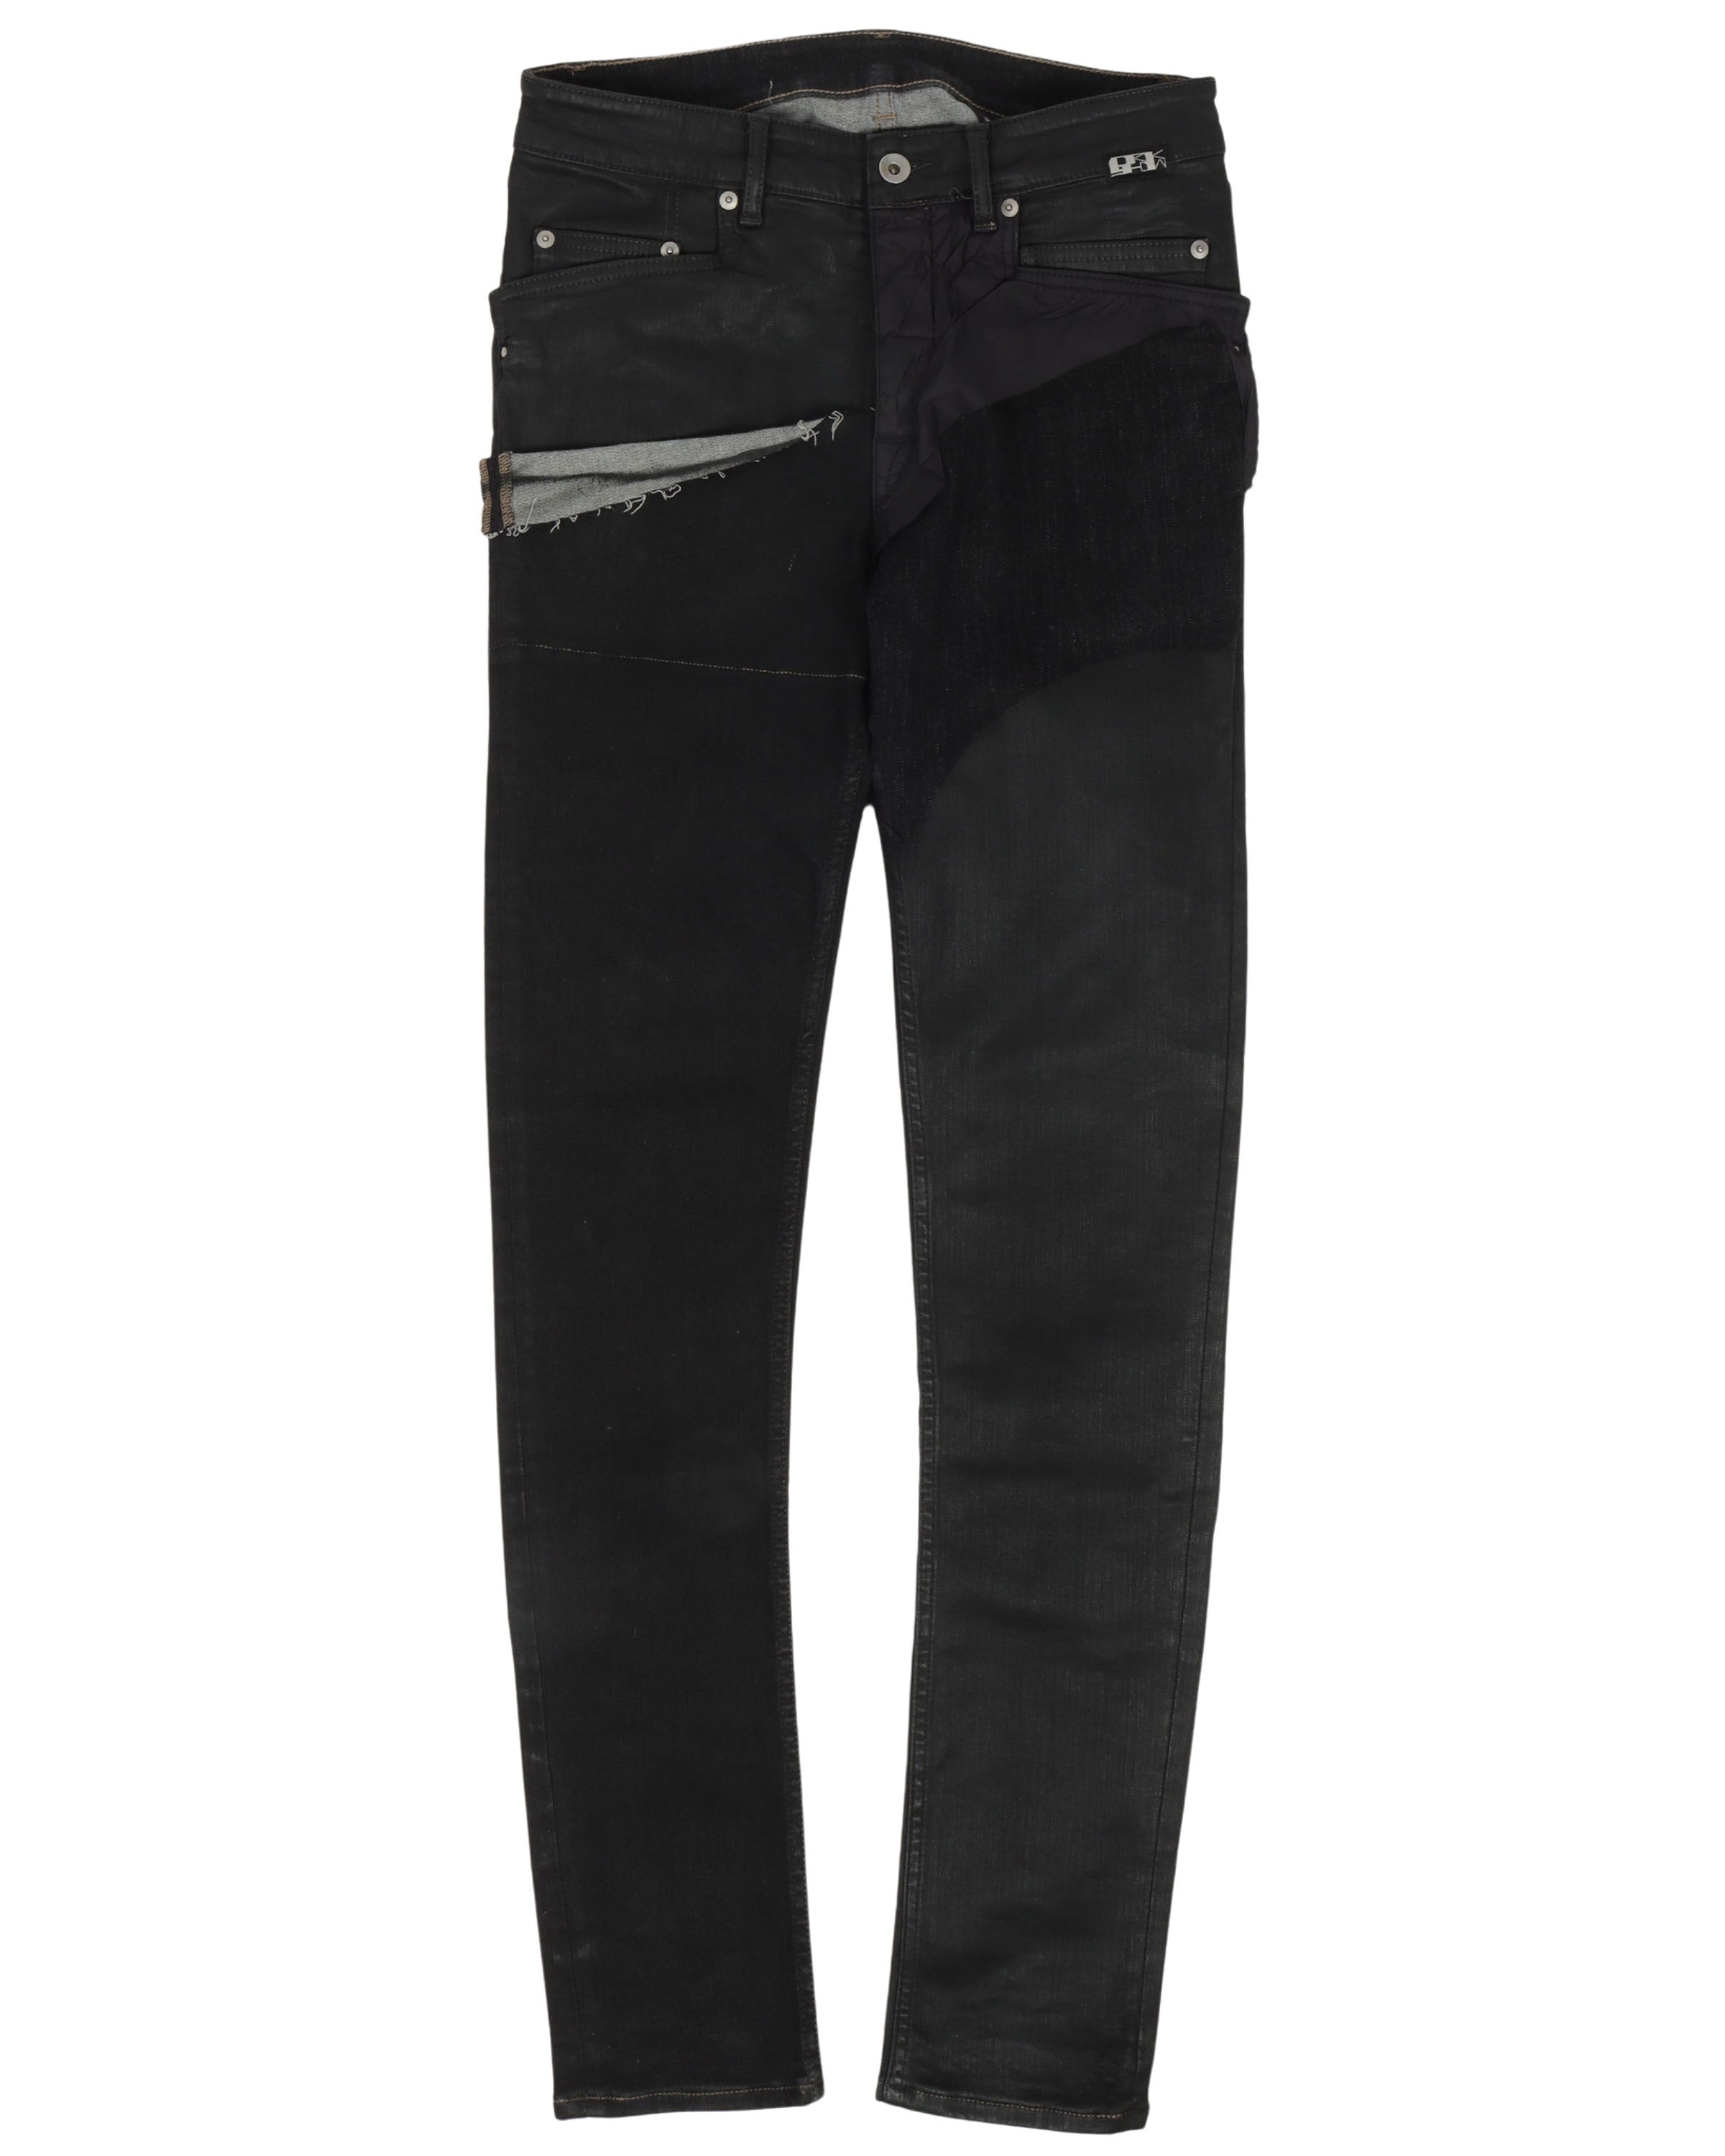 Tyrone Cut Patchwork Jeans